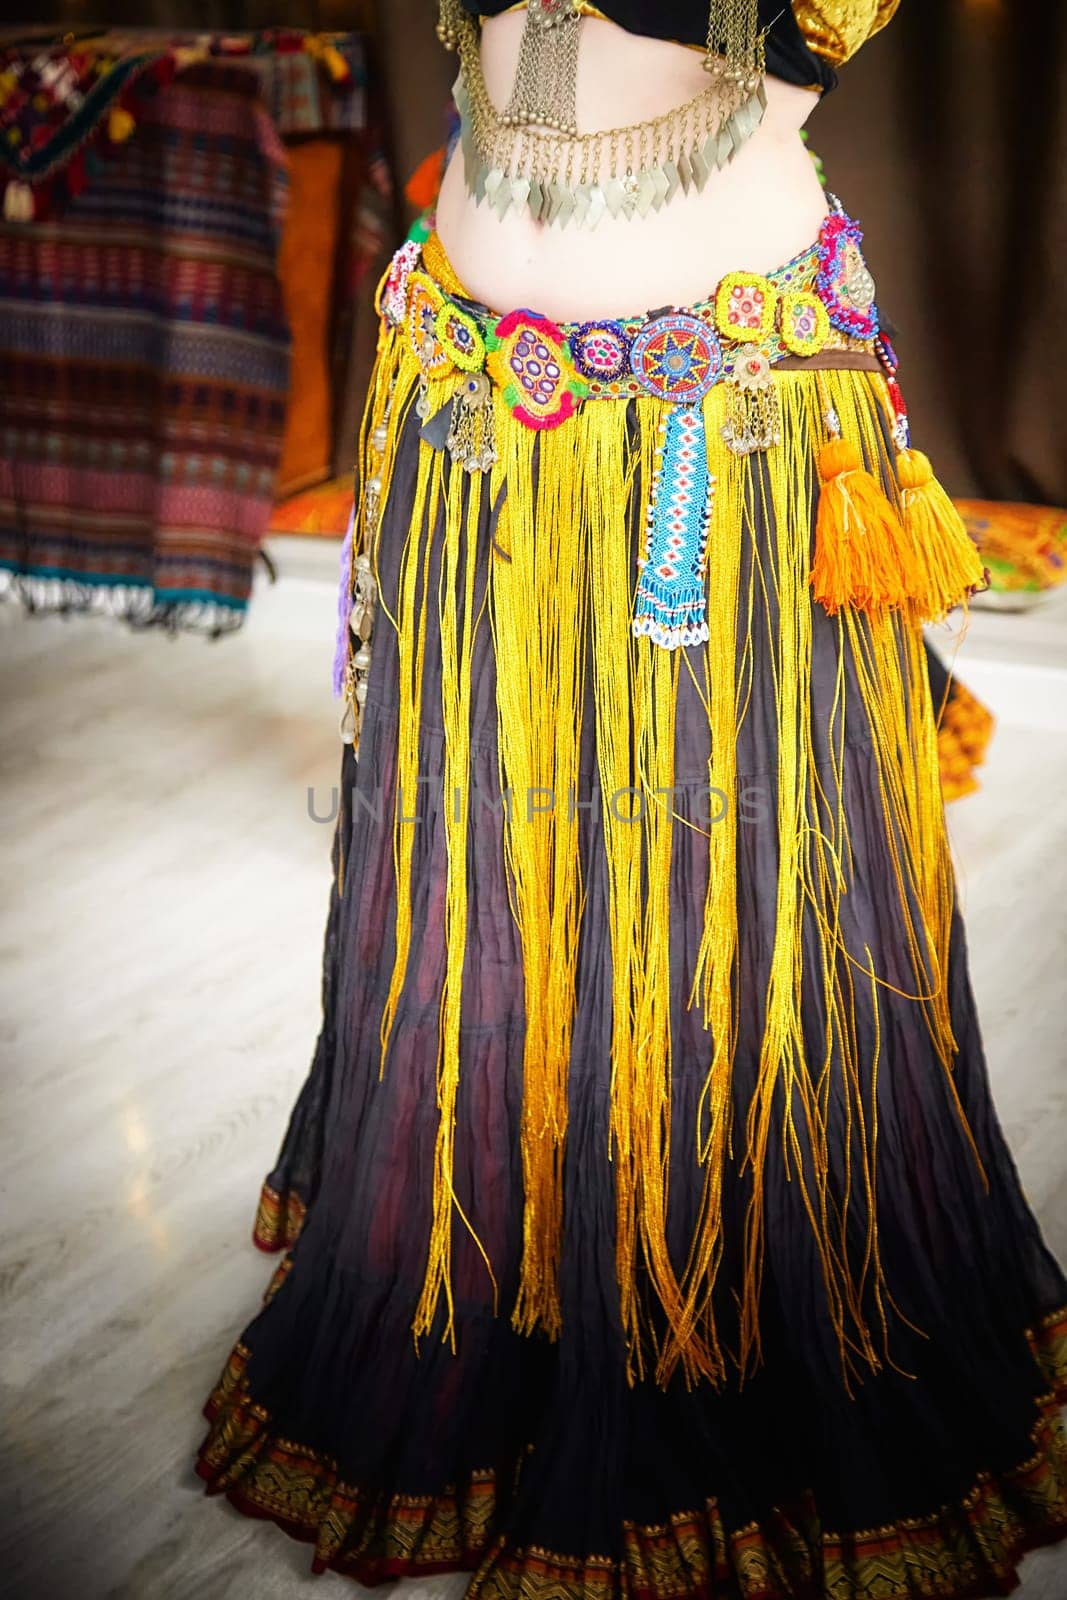 Diverse group of women wearing vibrant, multi-colored dress and tassels dancing tribal on ethnic celebratory event